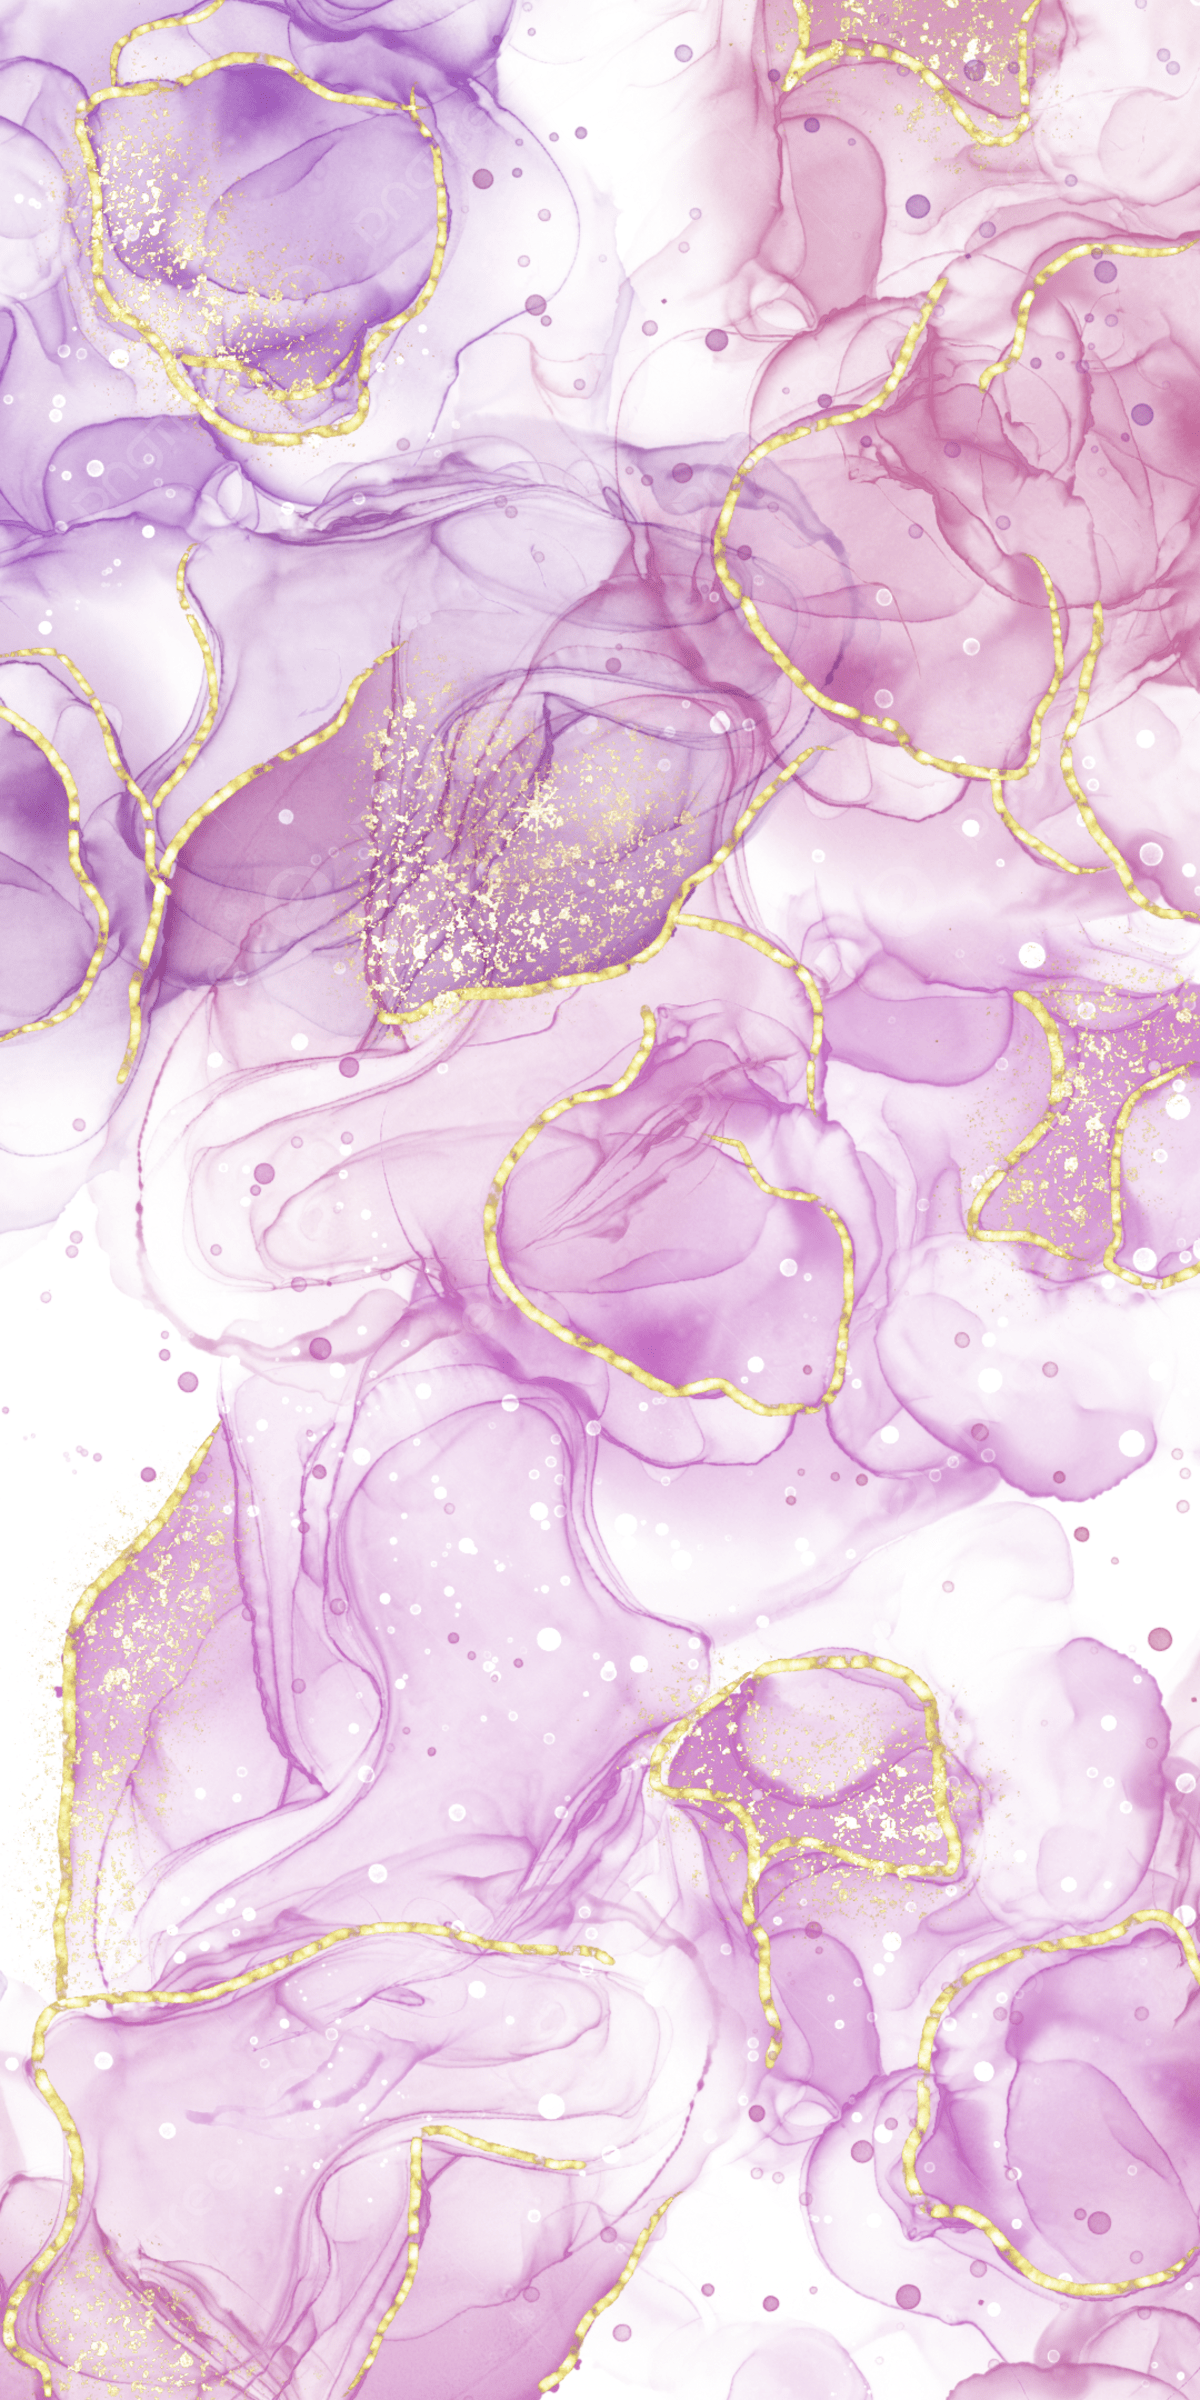 A painting of a purple and pink marble background with gold accents - Marble